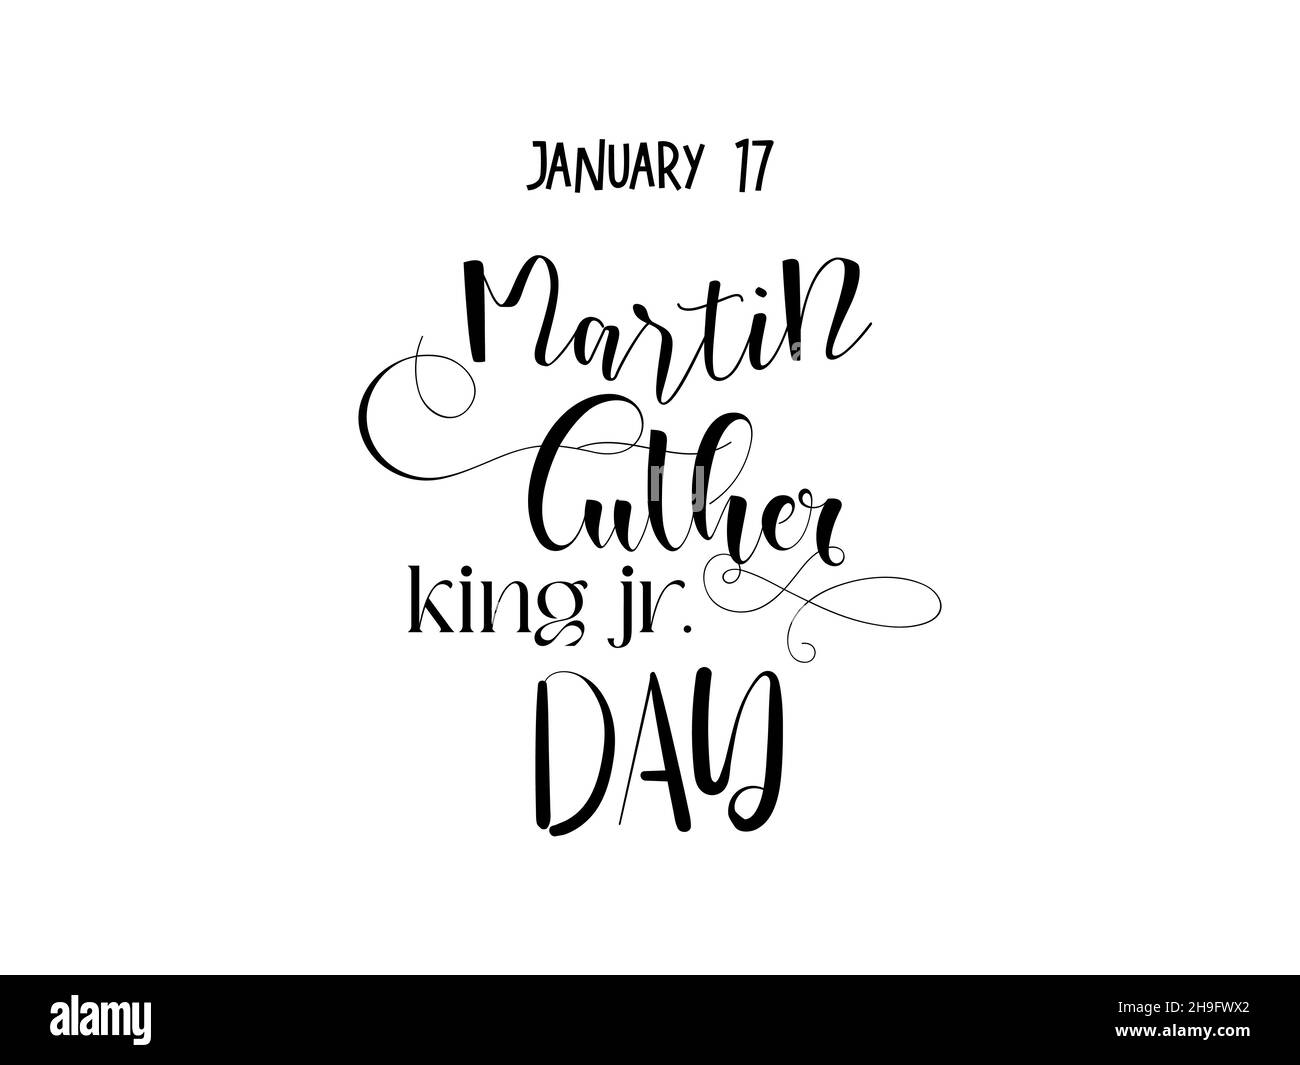 January 17 - MLK Day. Calligraphy style hand lettering design for Martin Luther King Jr. Day. Awareness vector illustration for banner, poster, tshirt Stock Vector